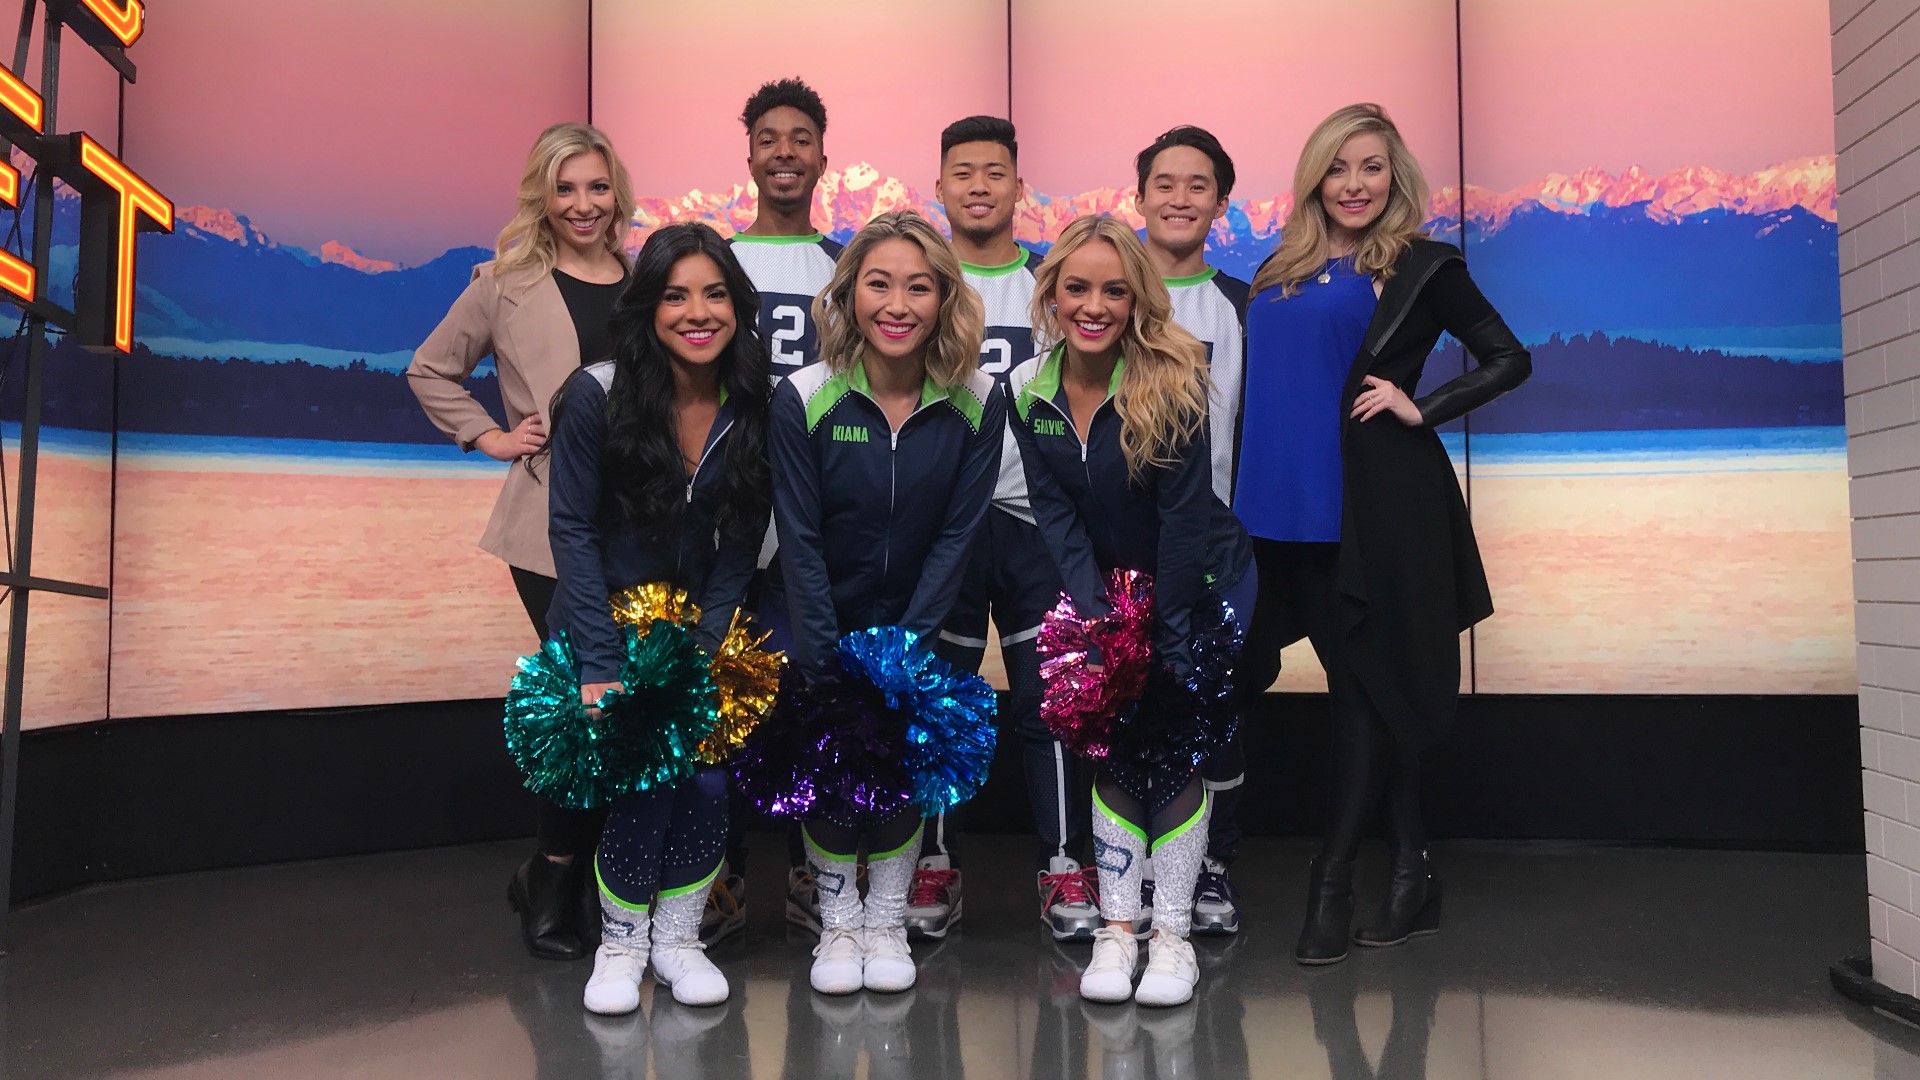 Find out how you can help the Seahawks Dancers raise cancer awareness all month long with the Crucial Catch: Intercept Cancer campaign.